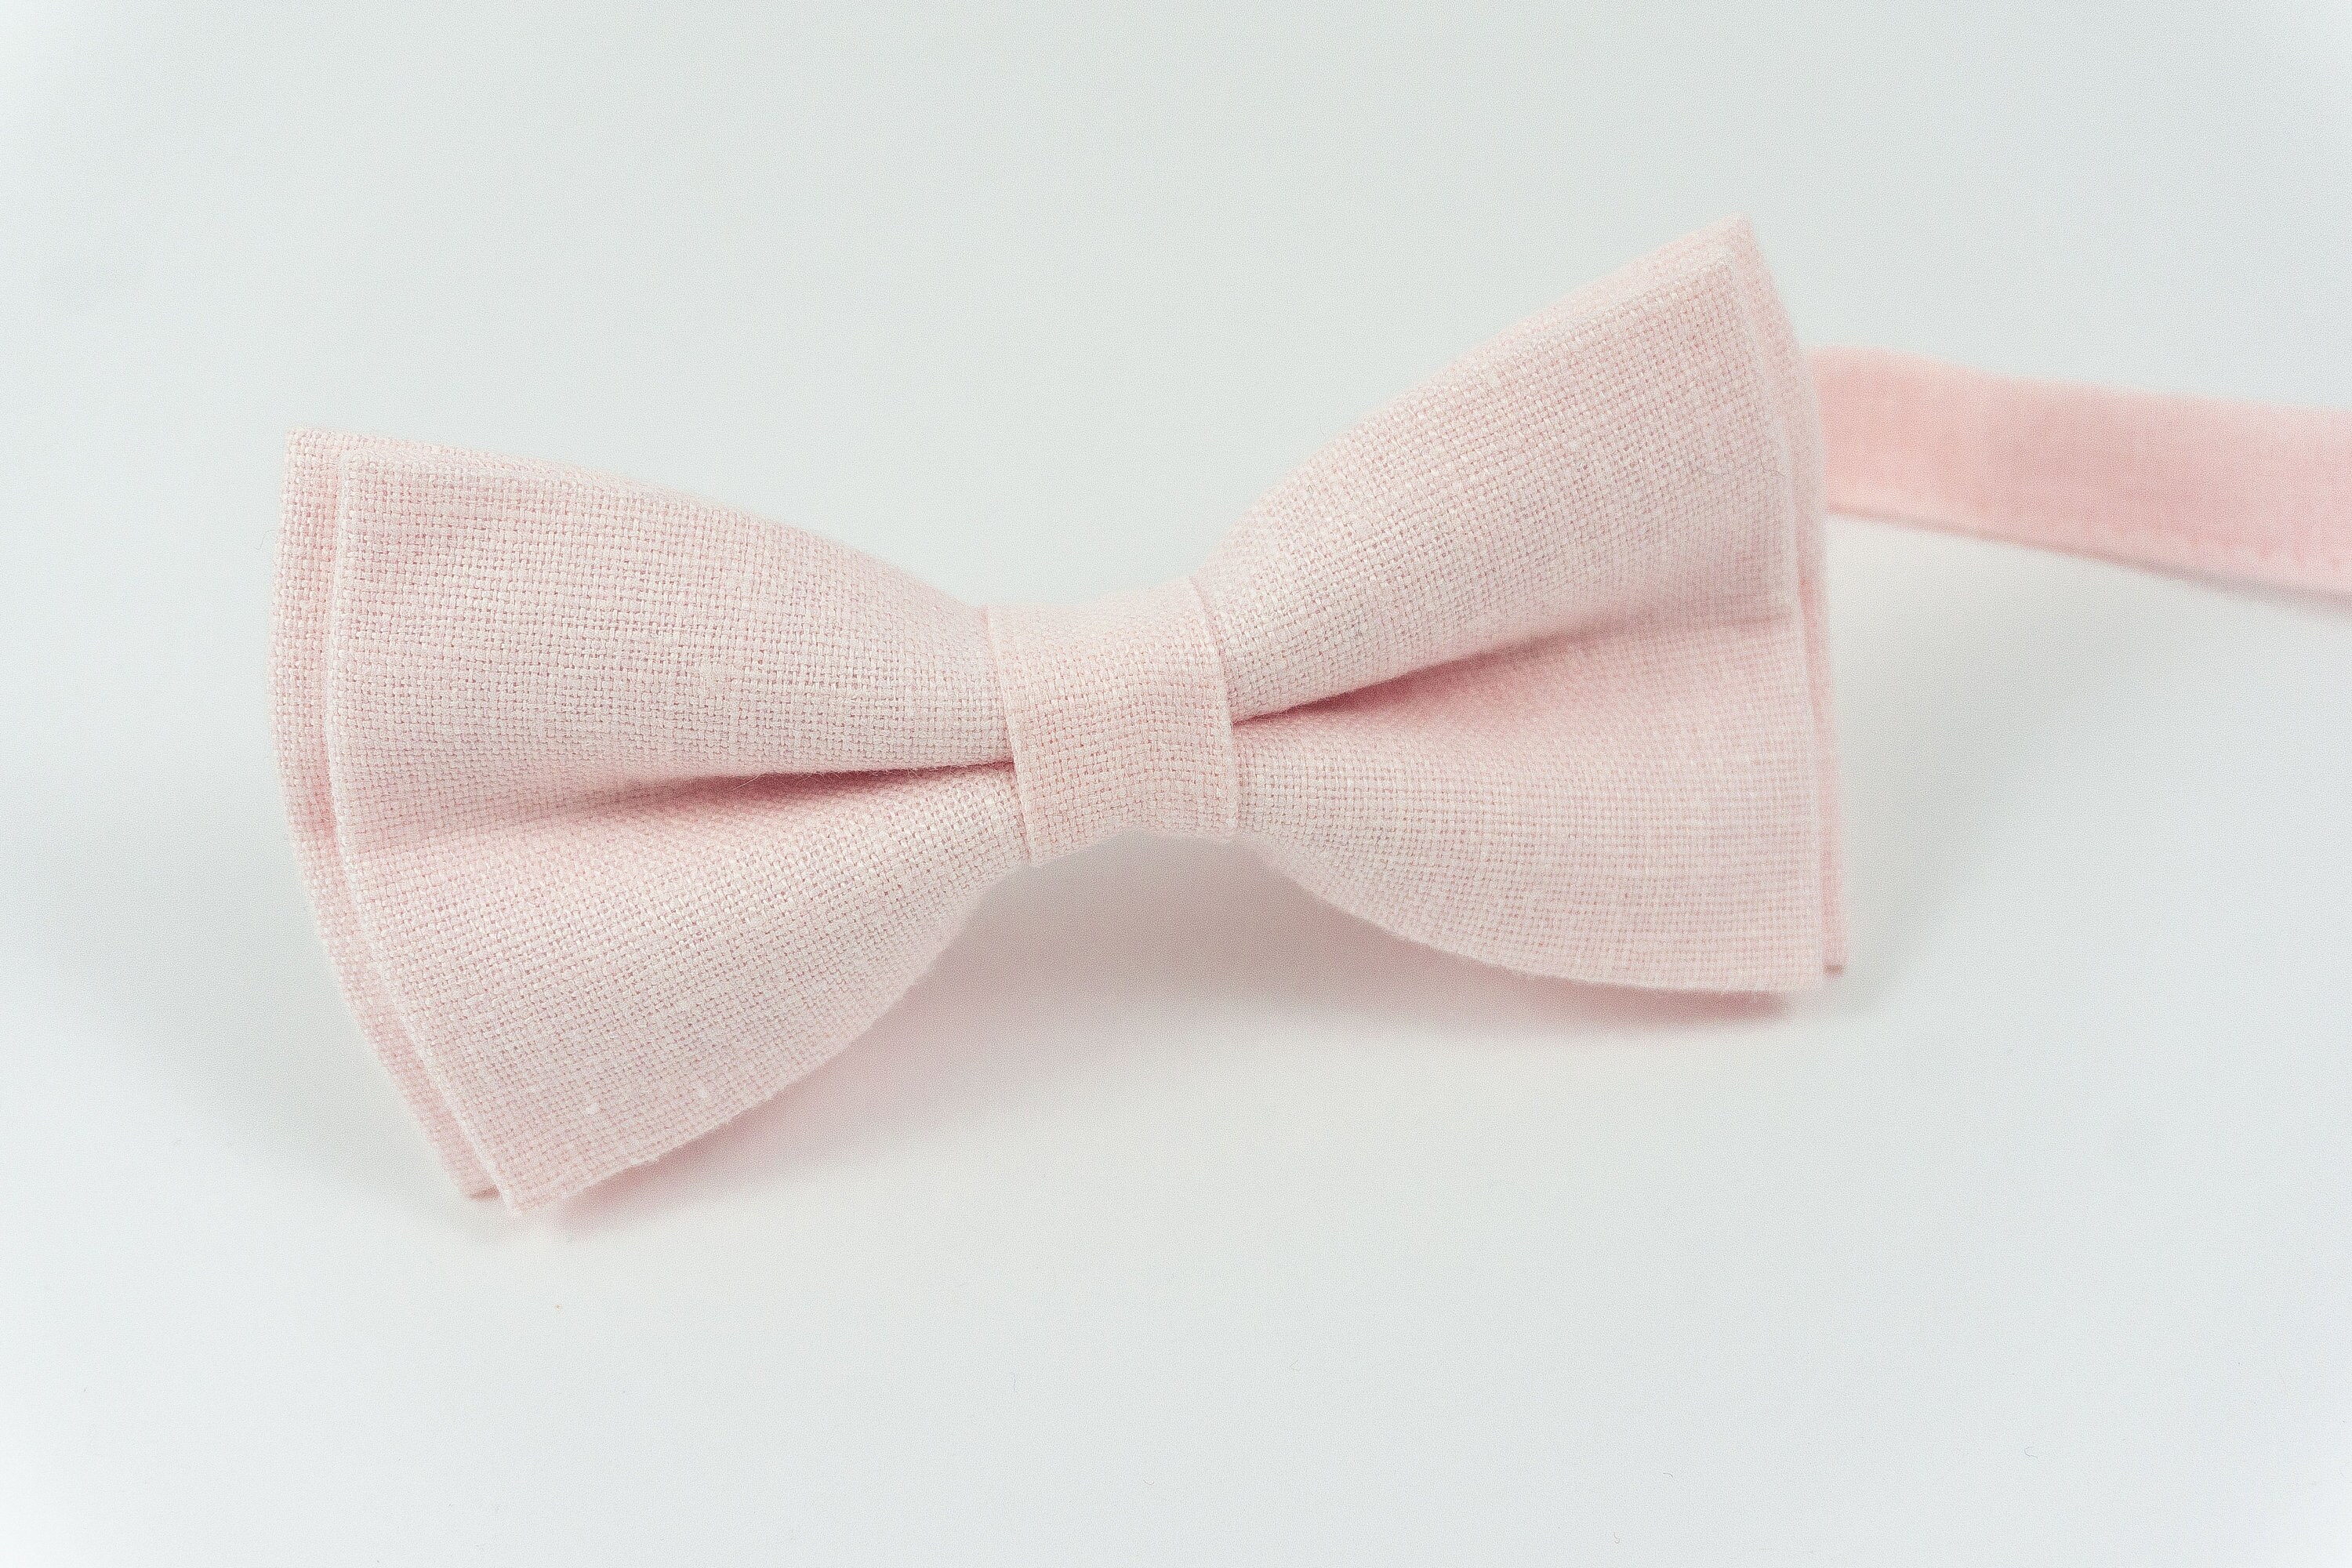 Blush pink linen classic bow ties blush pink best mens ties | Etsy